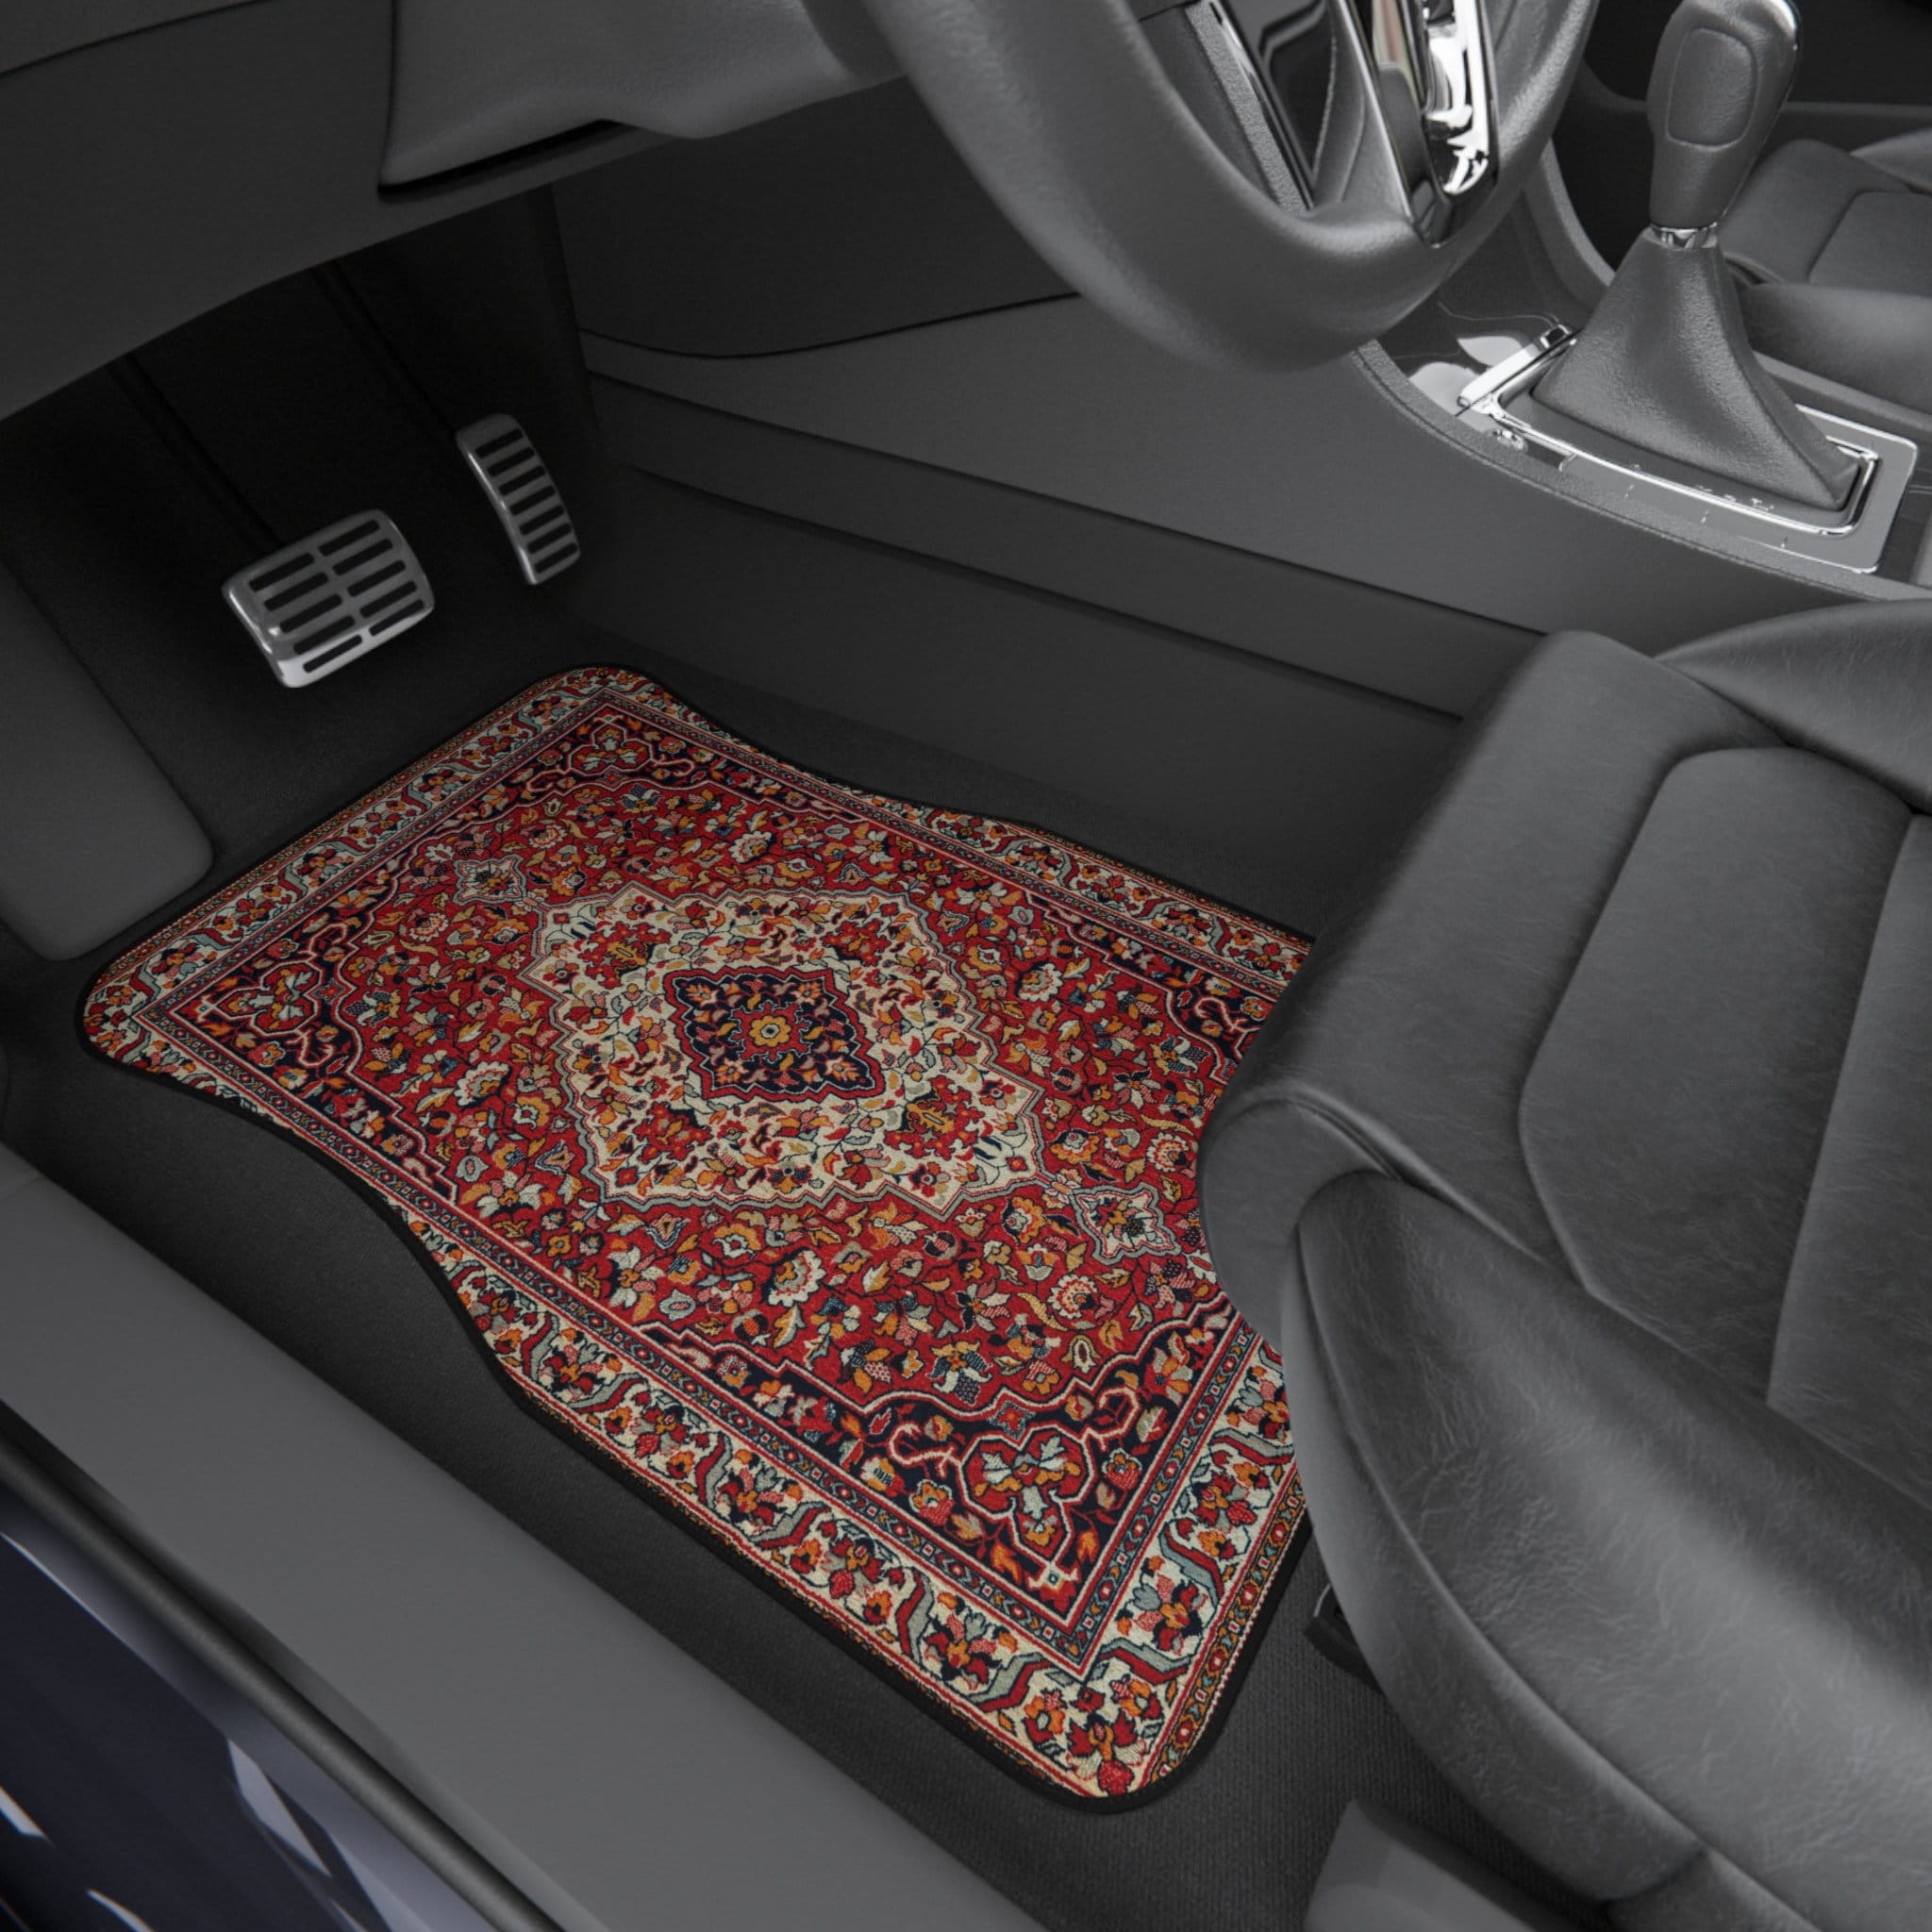 Antique Oriental Turkish Persian 4 Pieces Car Floor Mats Car Carpets Full  Sets Universal Fit for SUV, Vans, Sedans, Trucks All Weather Protection  Auto